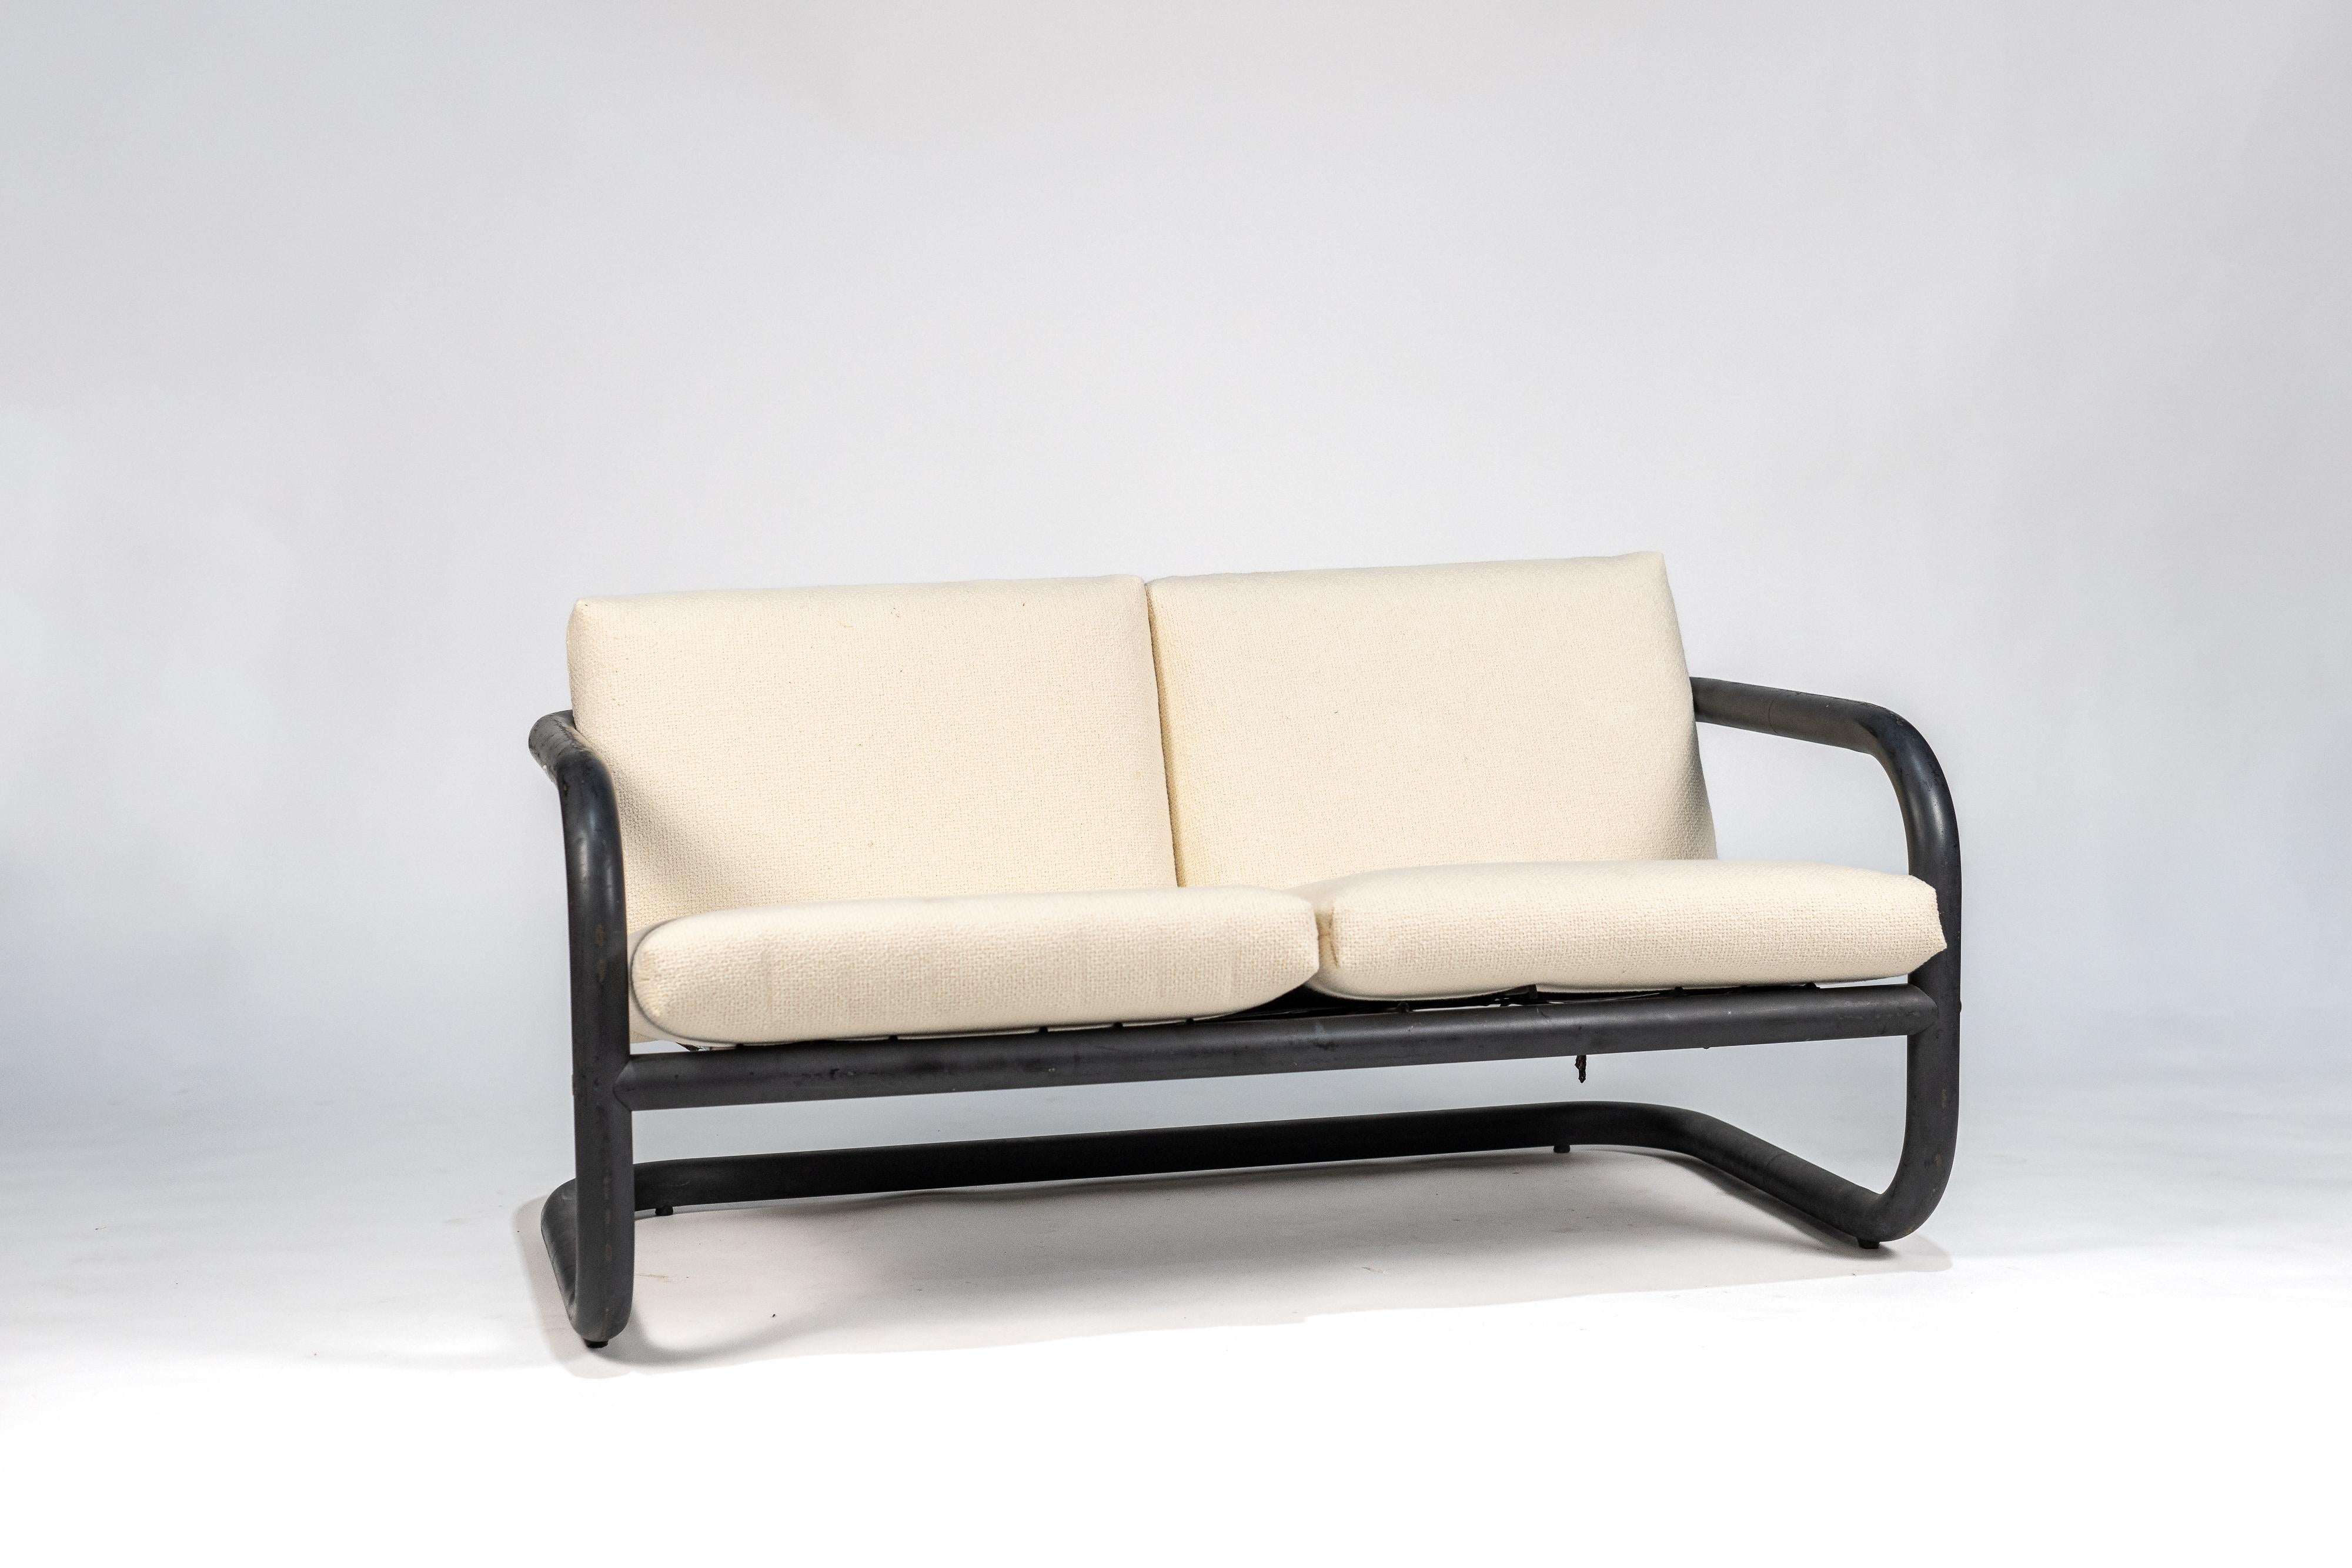 Designed in the 1970s, this three-seater sofa in tubular metal and white fabric by Geraldo de Barros is to be placed in the artistic continuity of its creators, who was an important artist (designer, engraver, painter, photographer, graphic designer